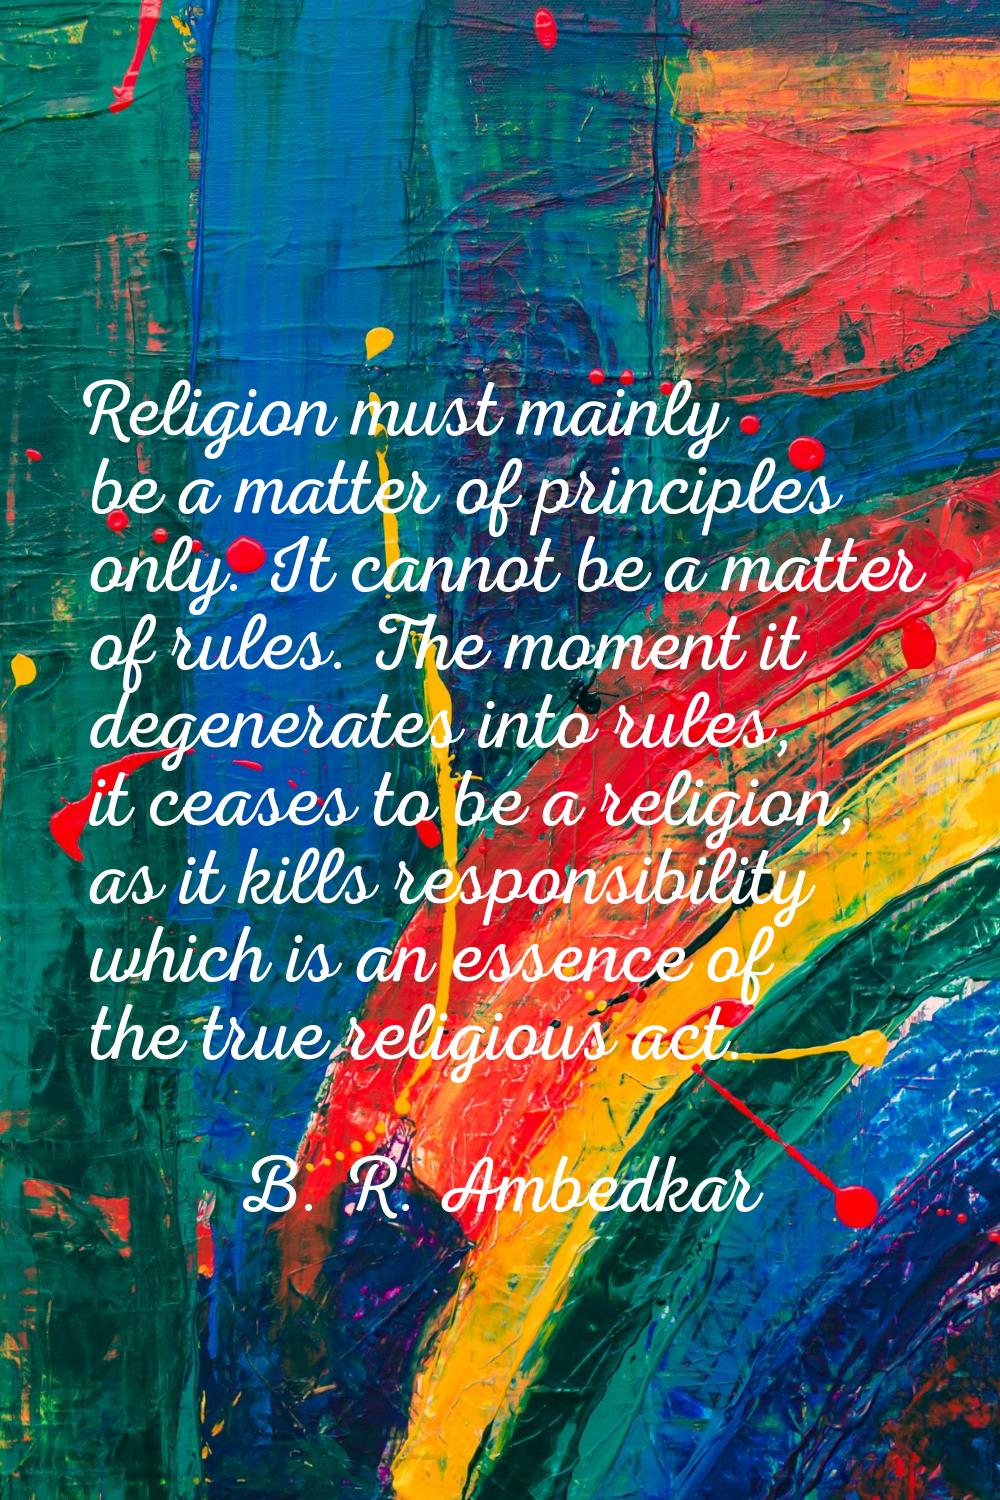 Religion must mainly be a matter of principles only. It cannot be a matter of rules. The moment it 